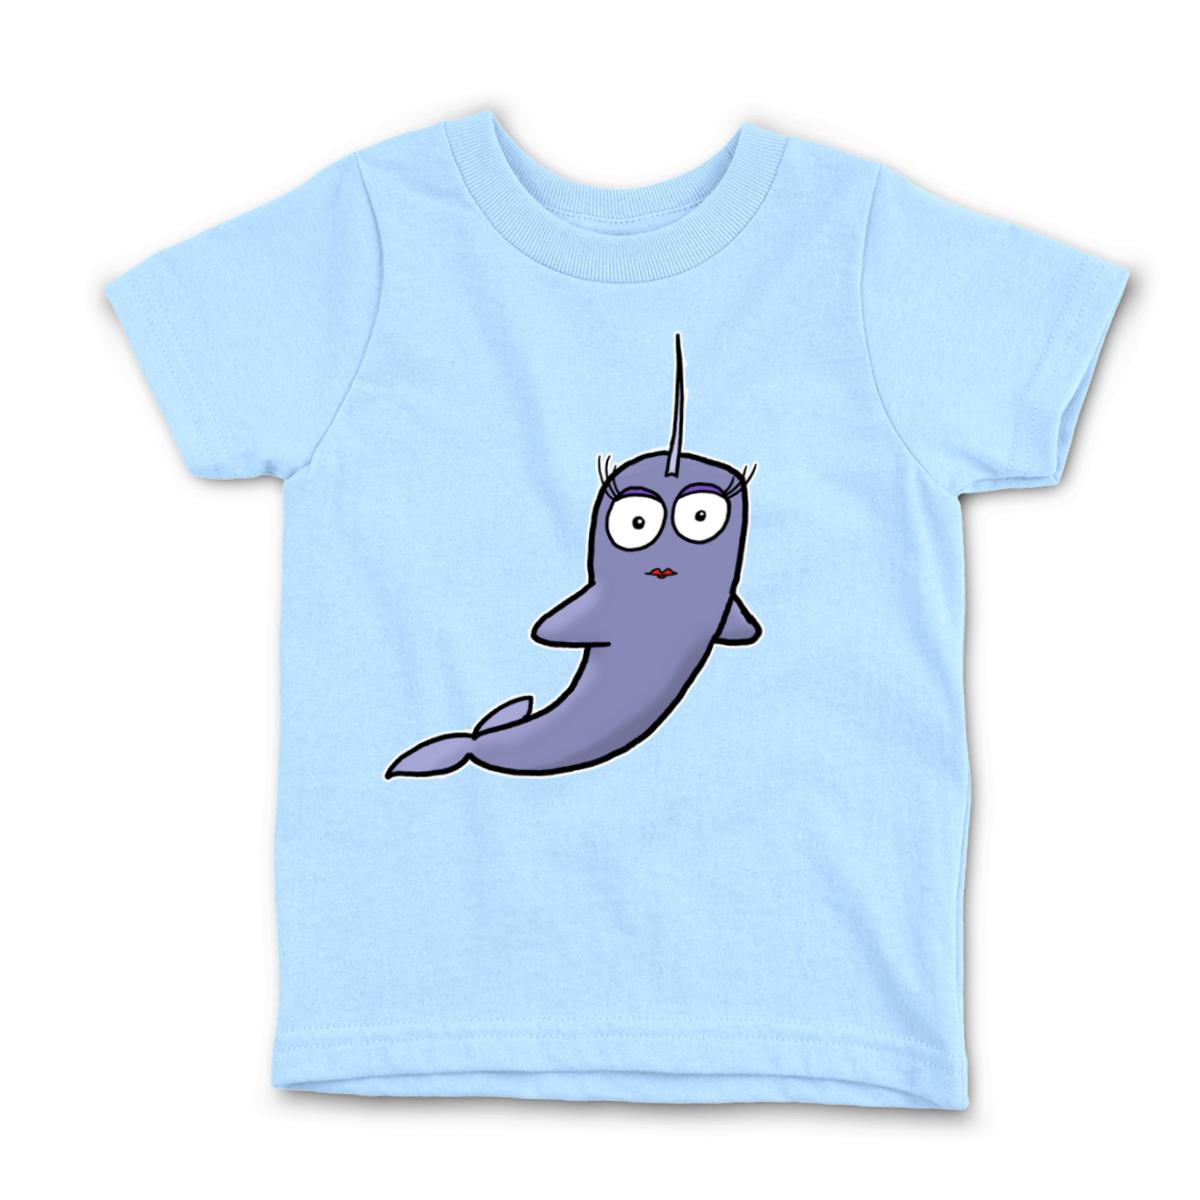 Narwhal Kid's Tee Small light-blue